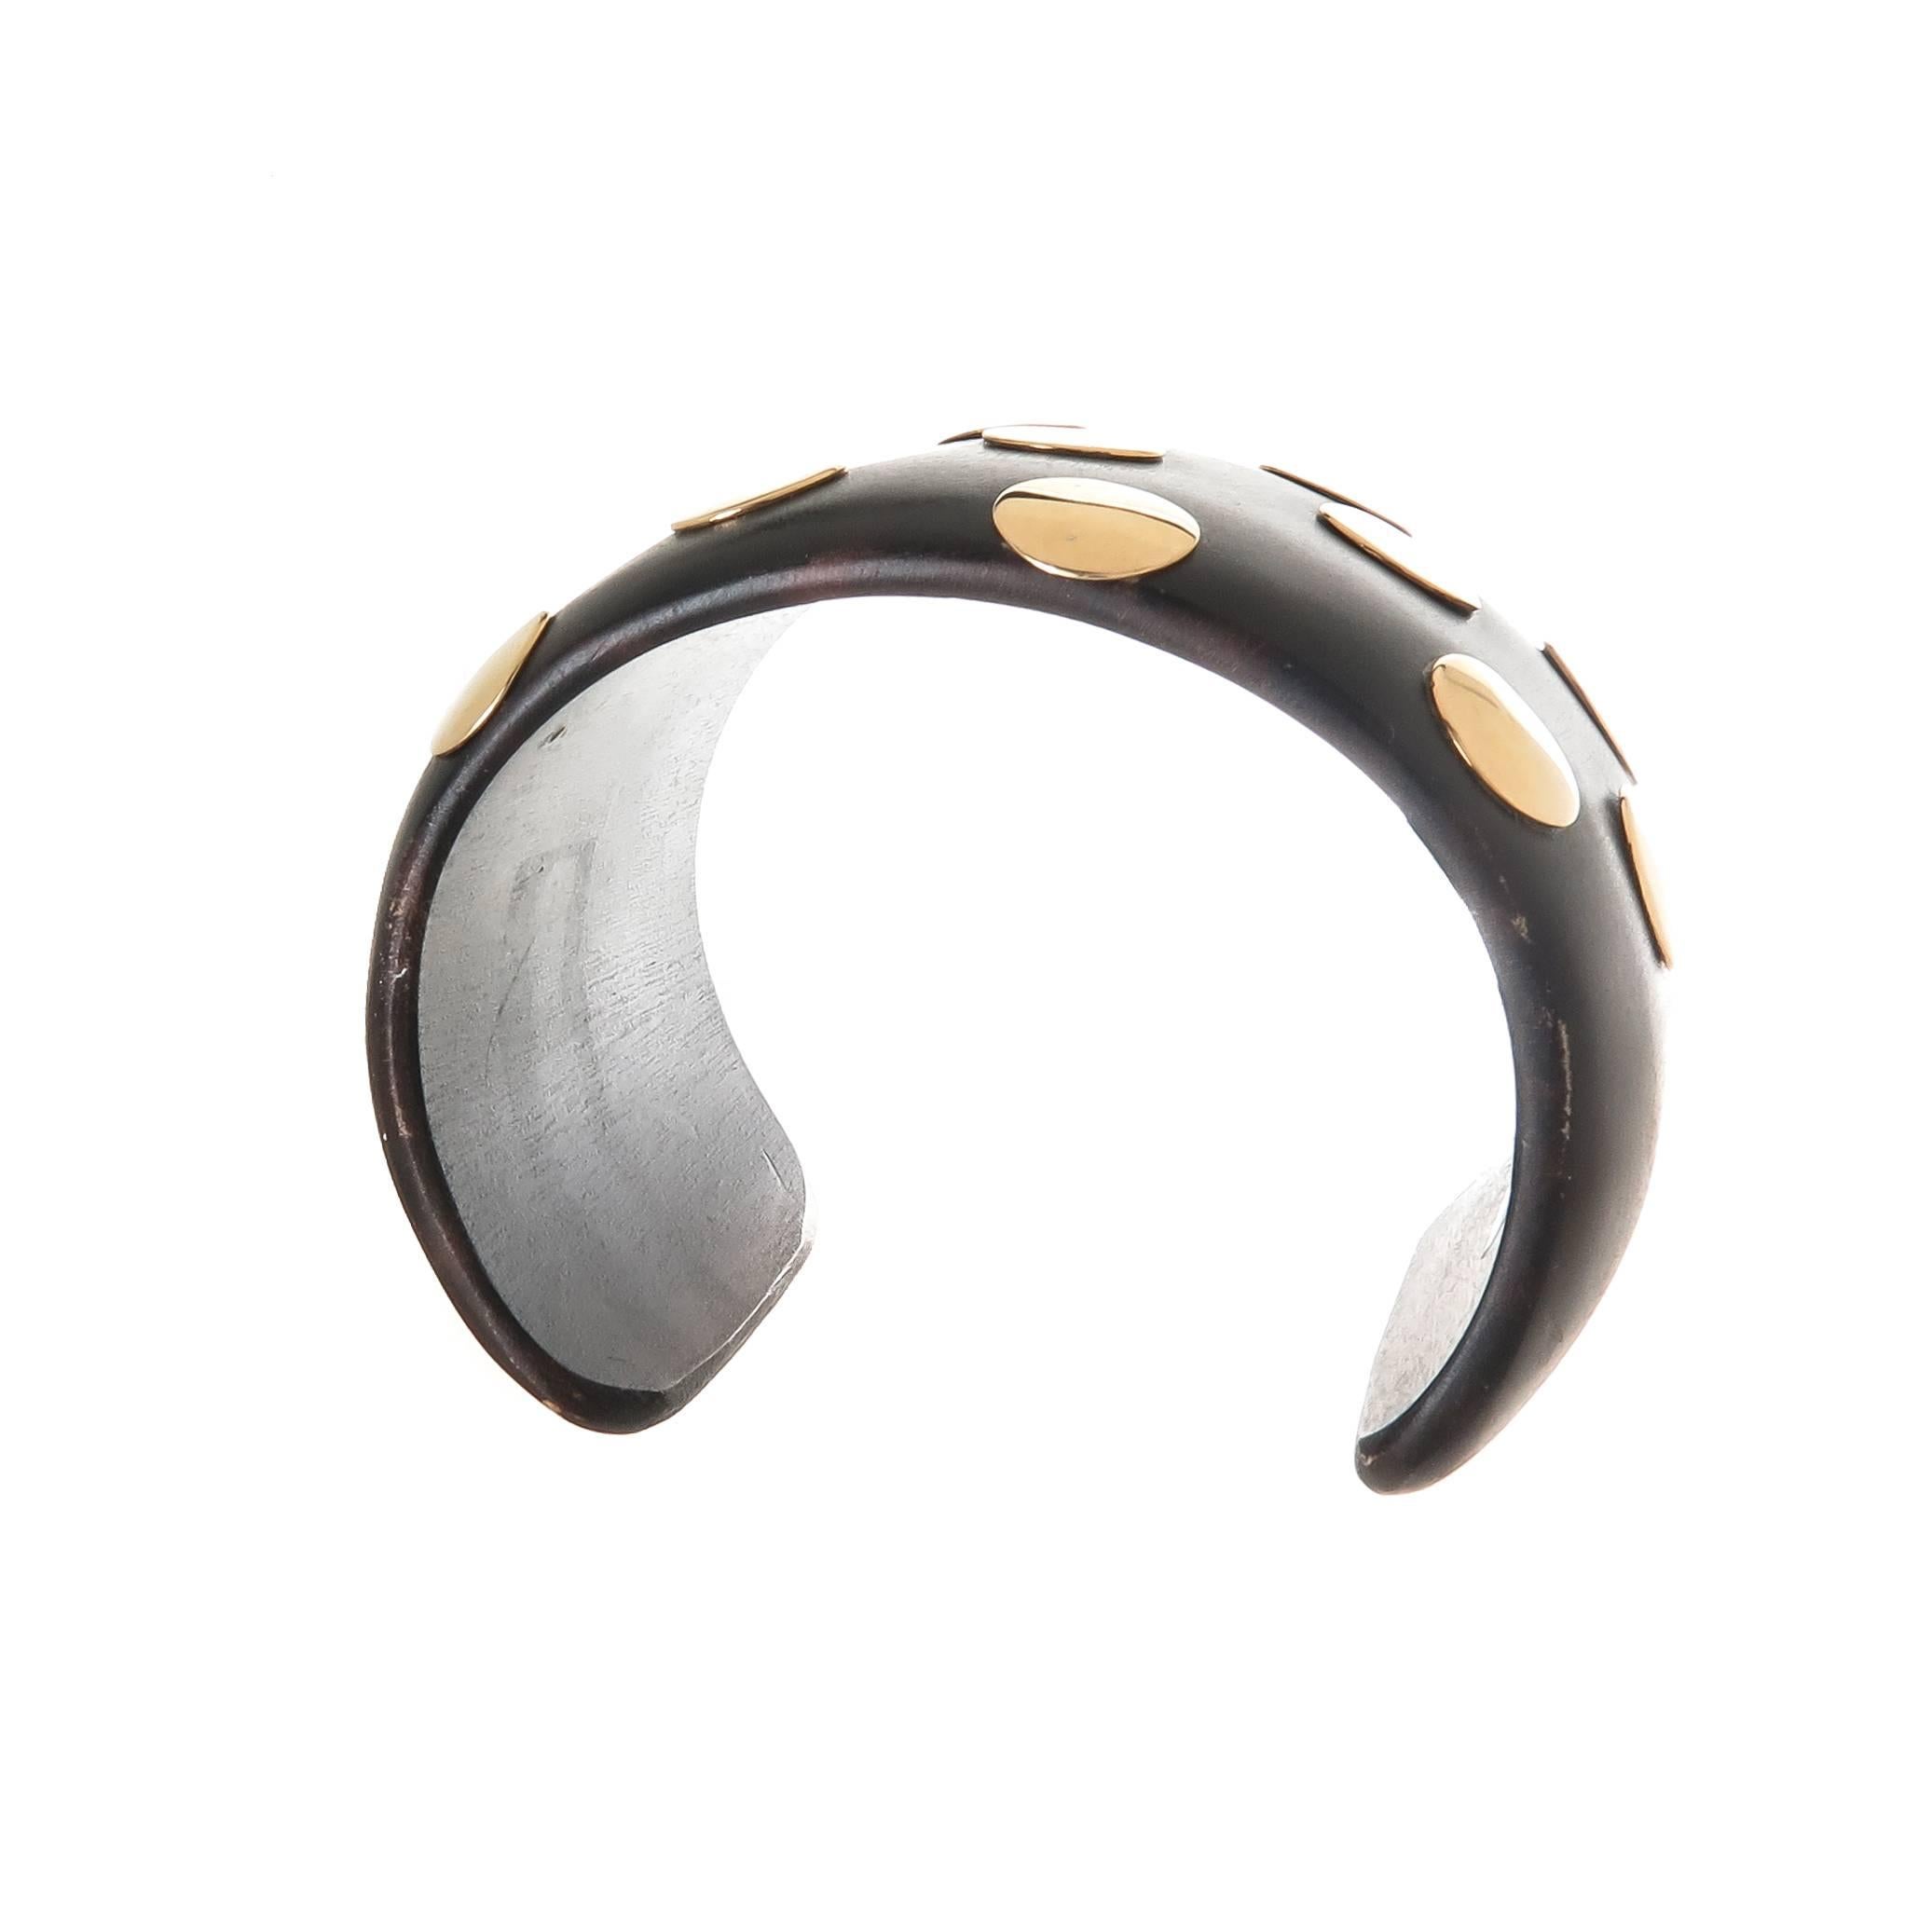 Circa 2000 Wood and 14K yellow Gold Dots mounted cuff bracelet, measuring 1 5/8 inch wide with an inside measurement of 6 inch an a 1 1/2 inch wide opening. 